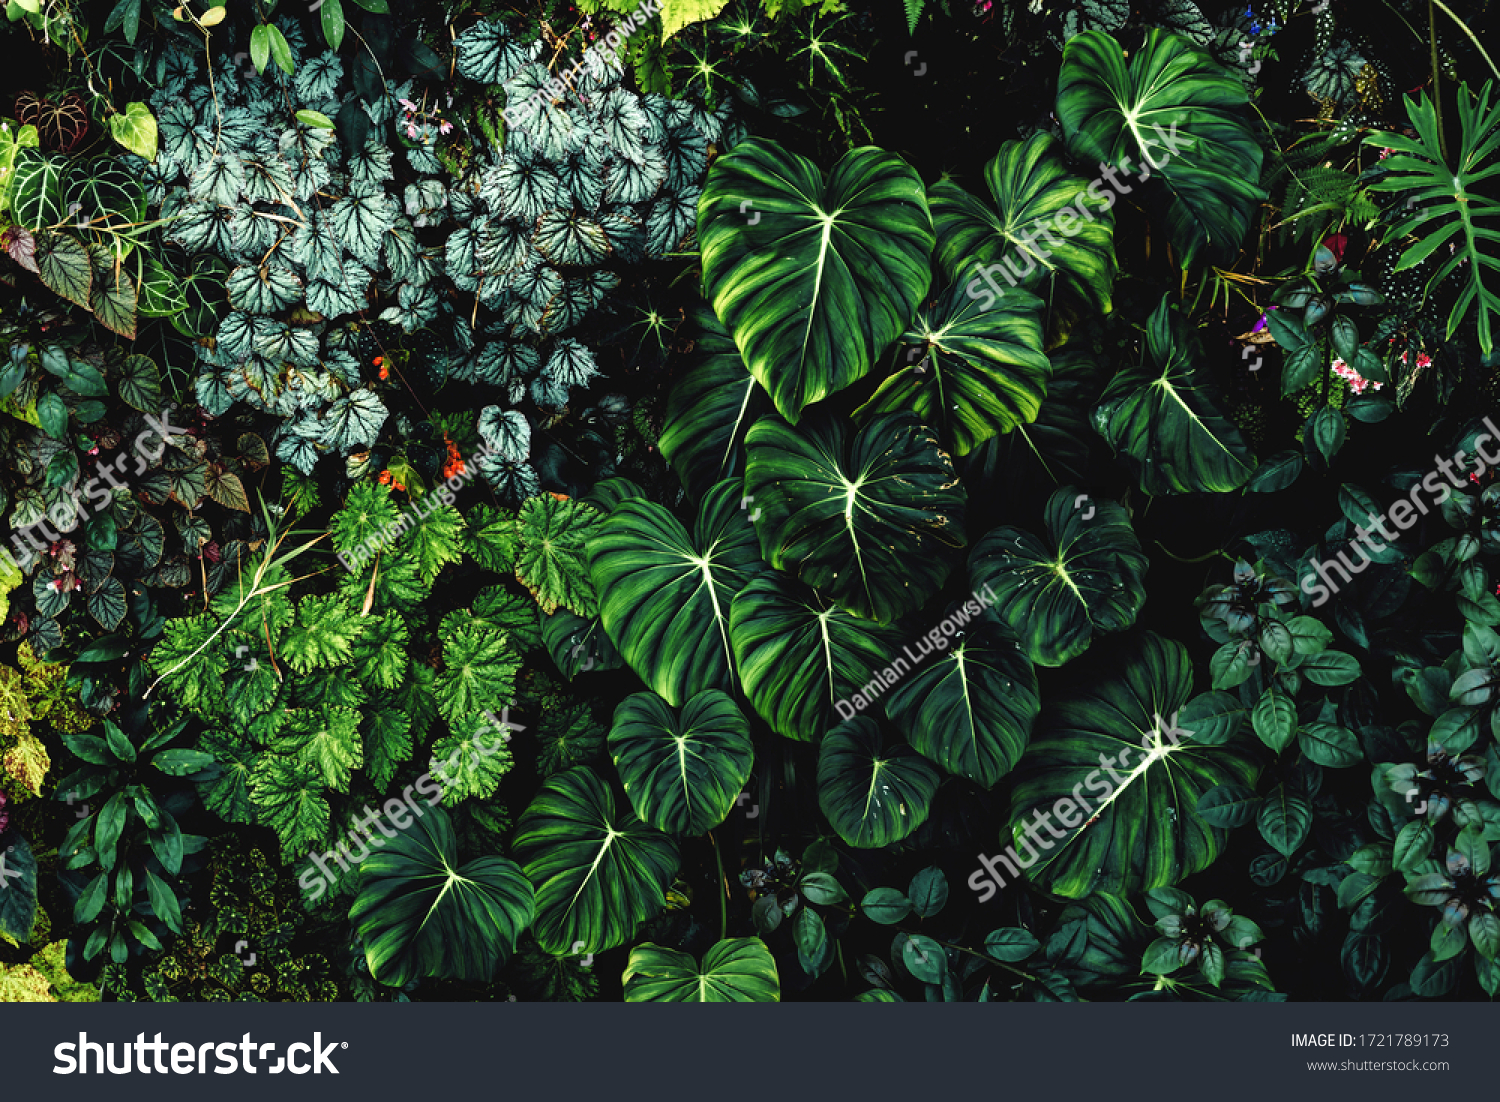 Lush foliage background. Green plant wall design of tropical leaves (anthurium, philodendron pastazanum, epiphytes or ferns). Dark green plants growing in cloud forest, rainforest in tropical climate #1721789173